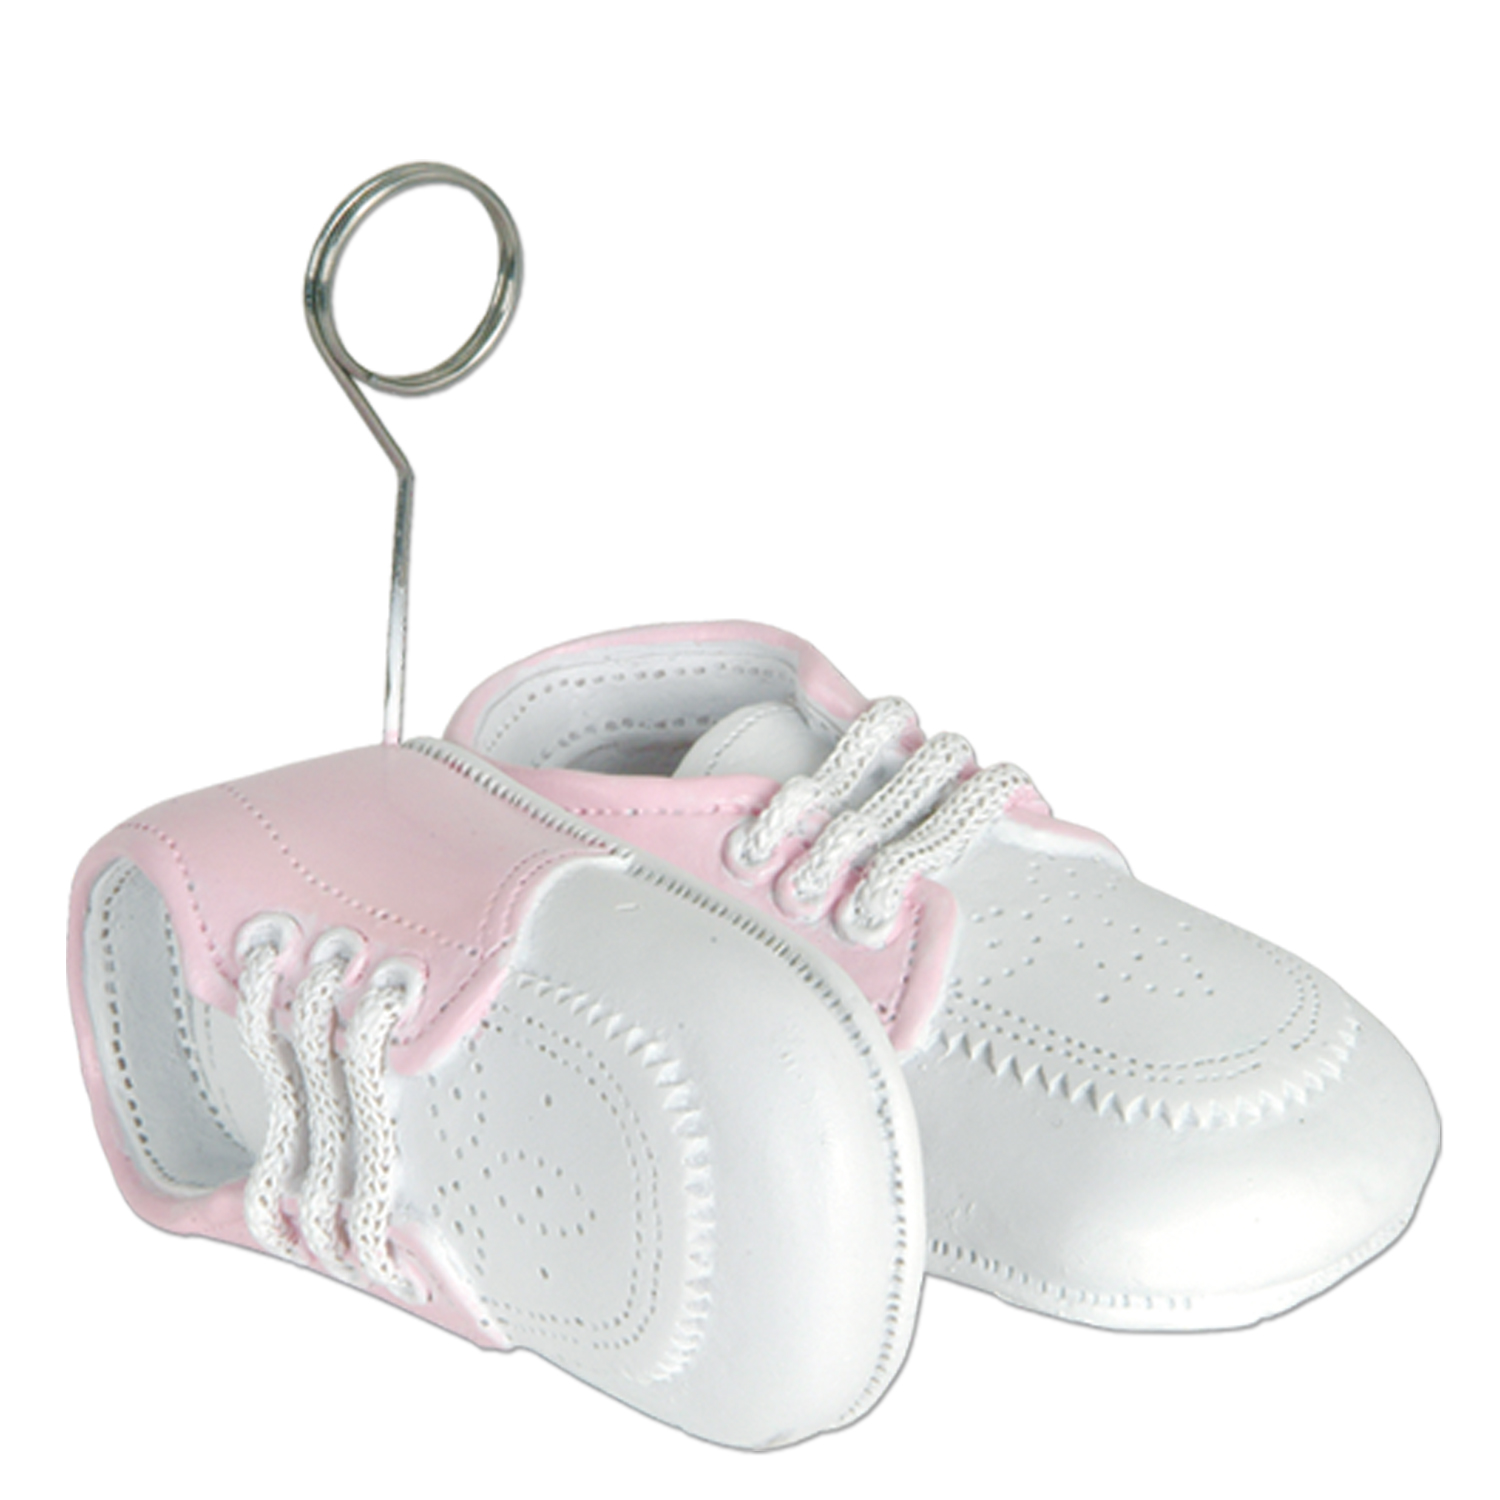 Baby SHOES Photo/Balloon Holder